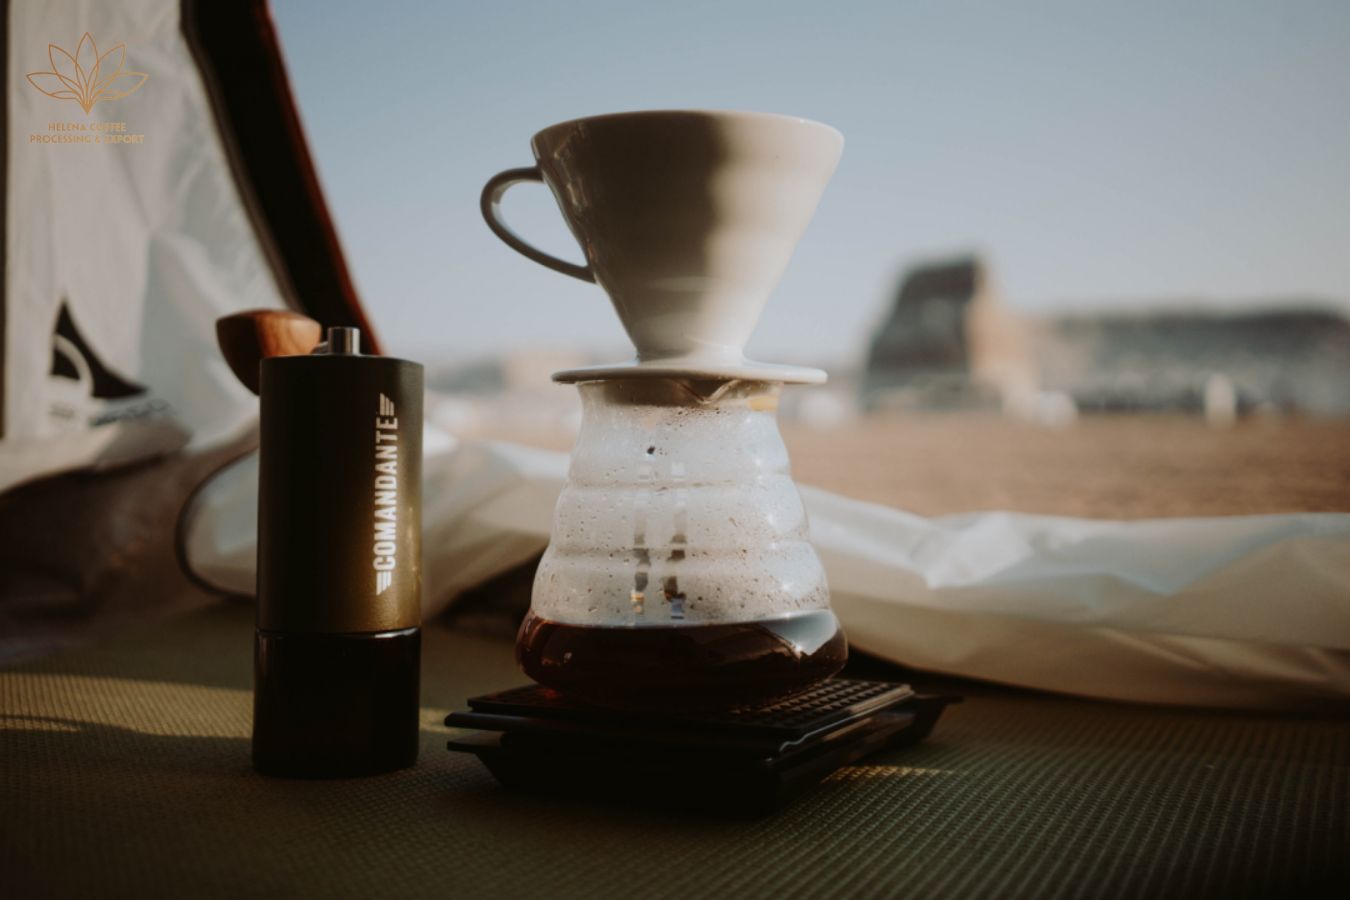 Tips For Making Coffee - The Simplest Immersion Method